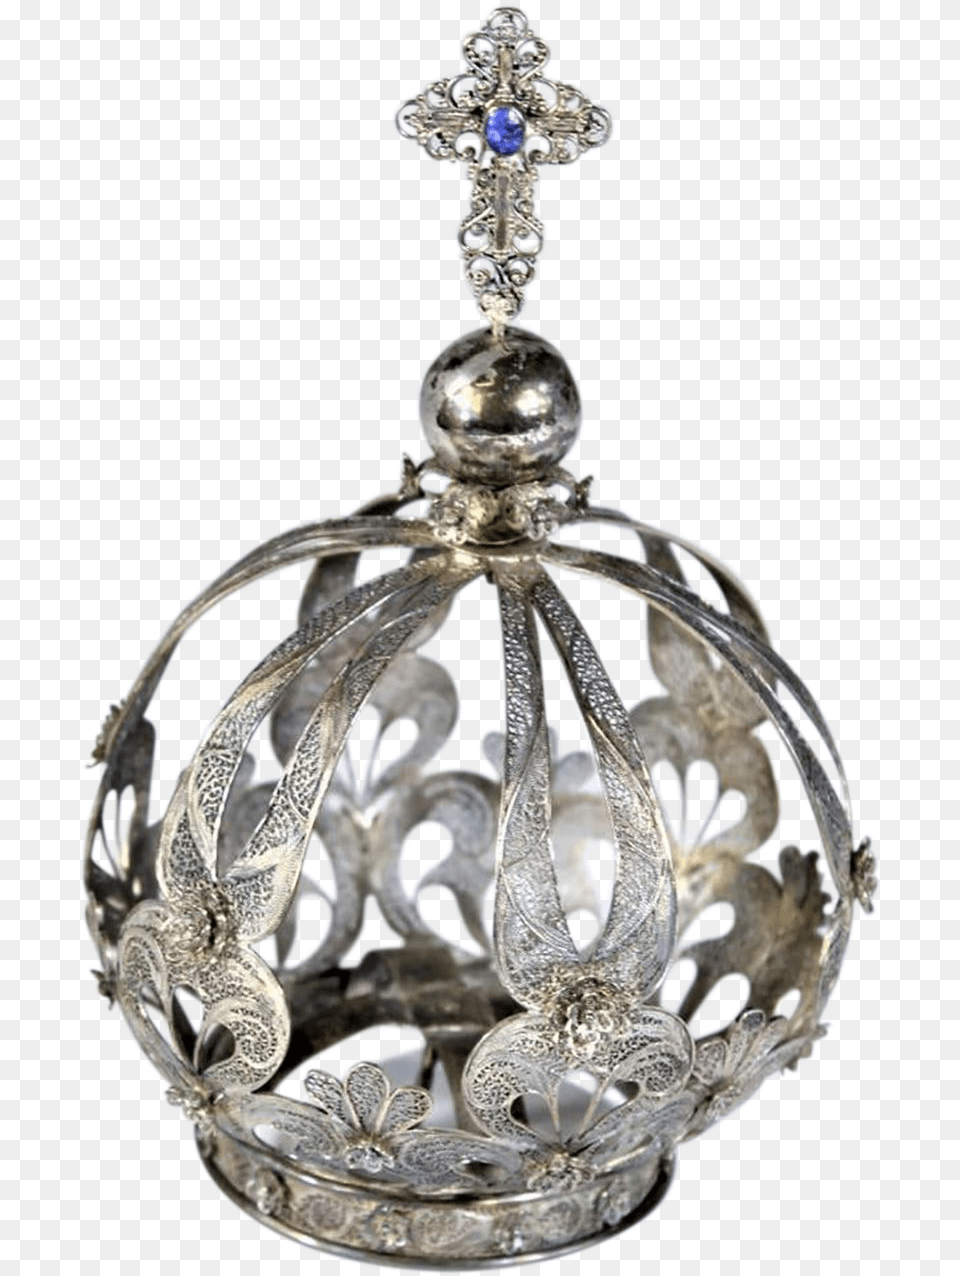 Portuguese Silver Crown 18th Century Crystal, Accessories, Jewelry, Chandelier, Lamp Png